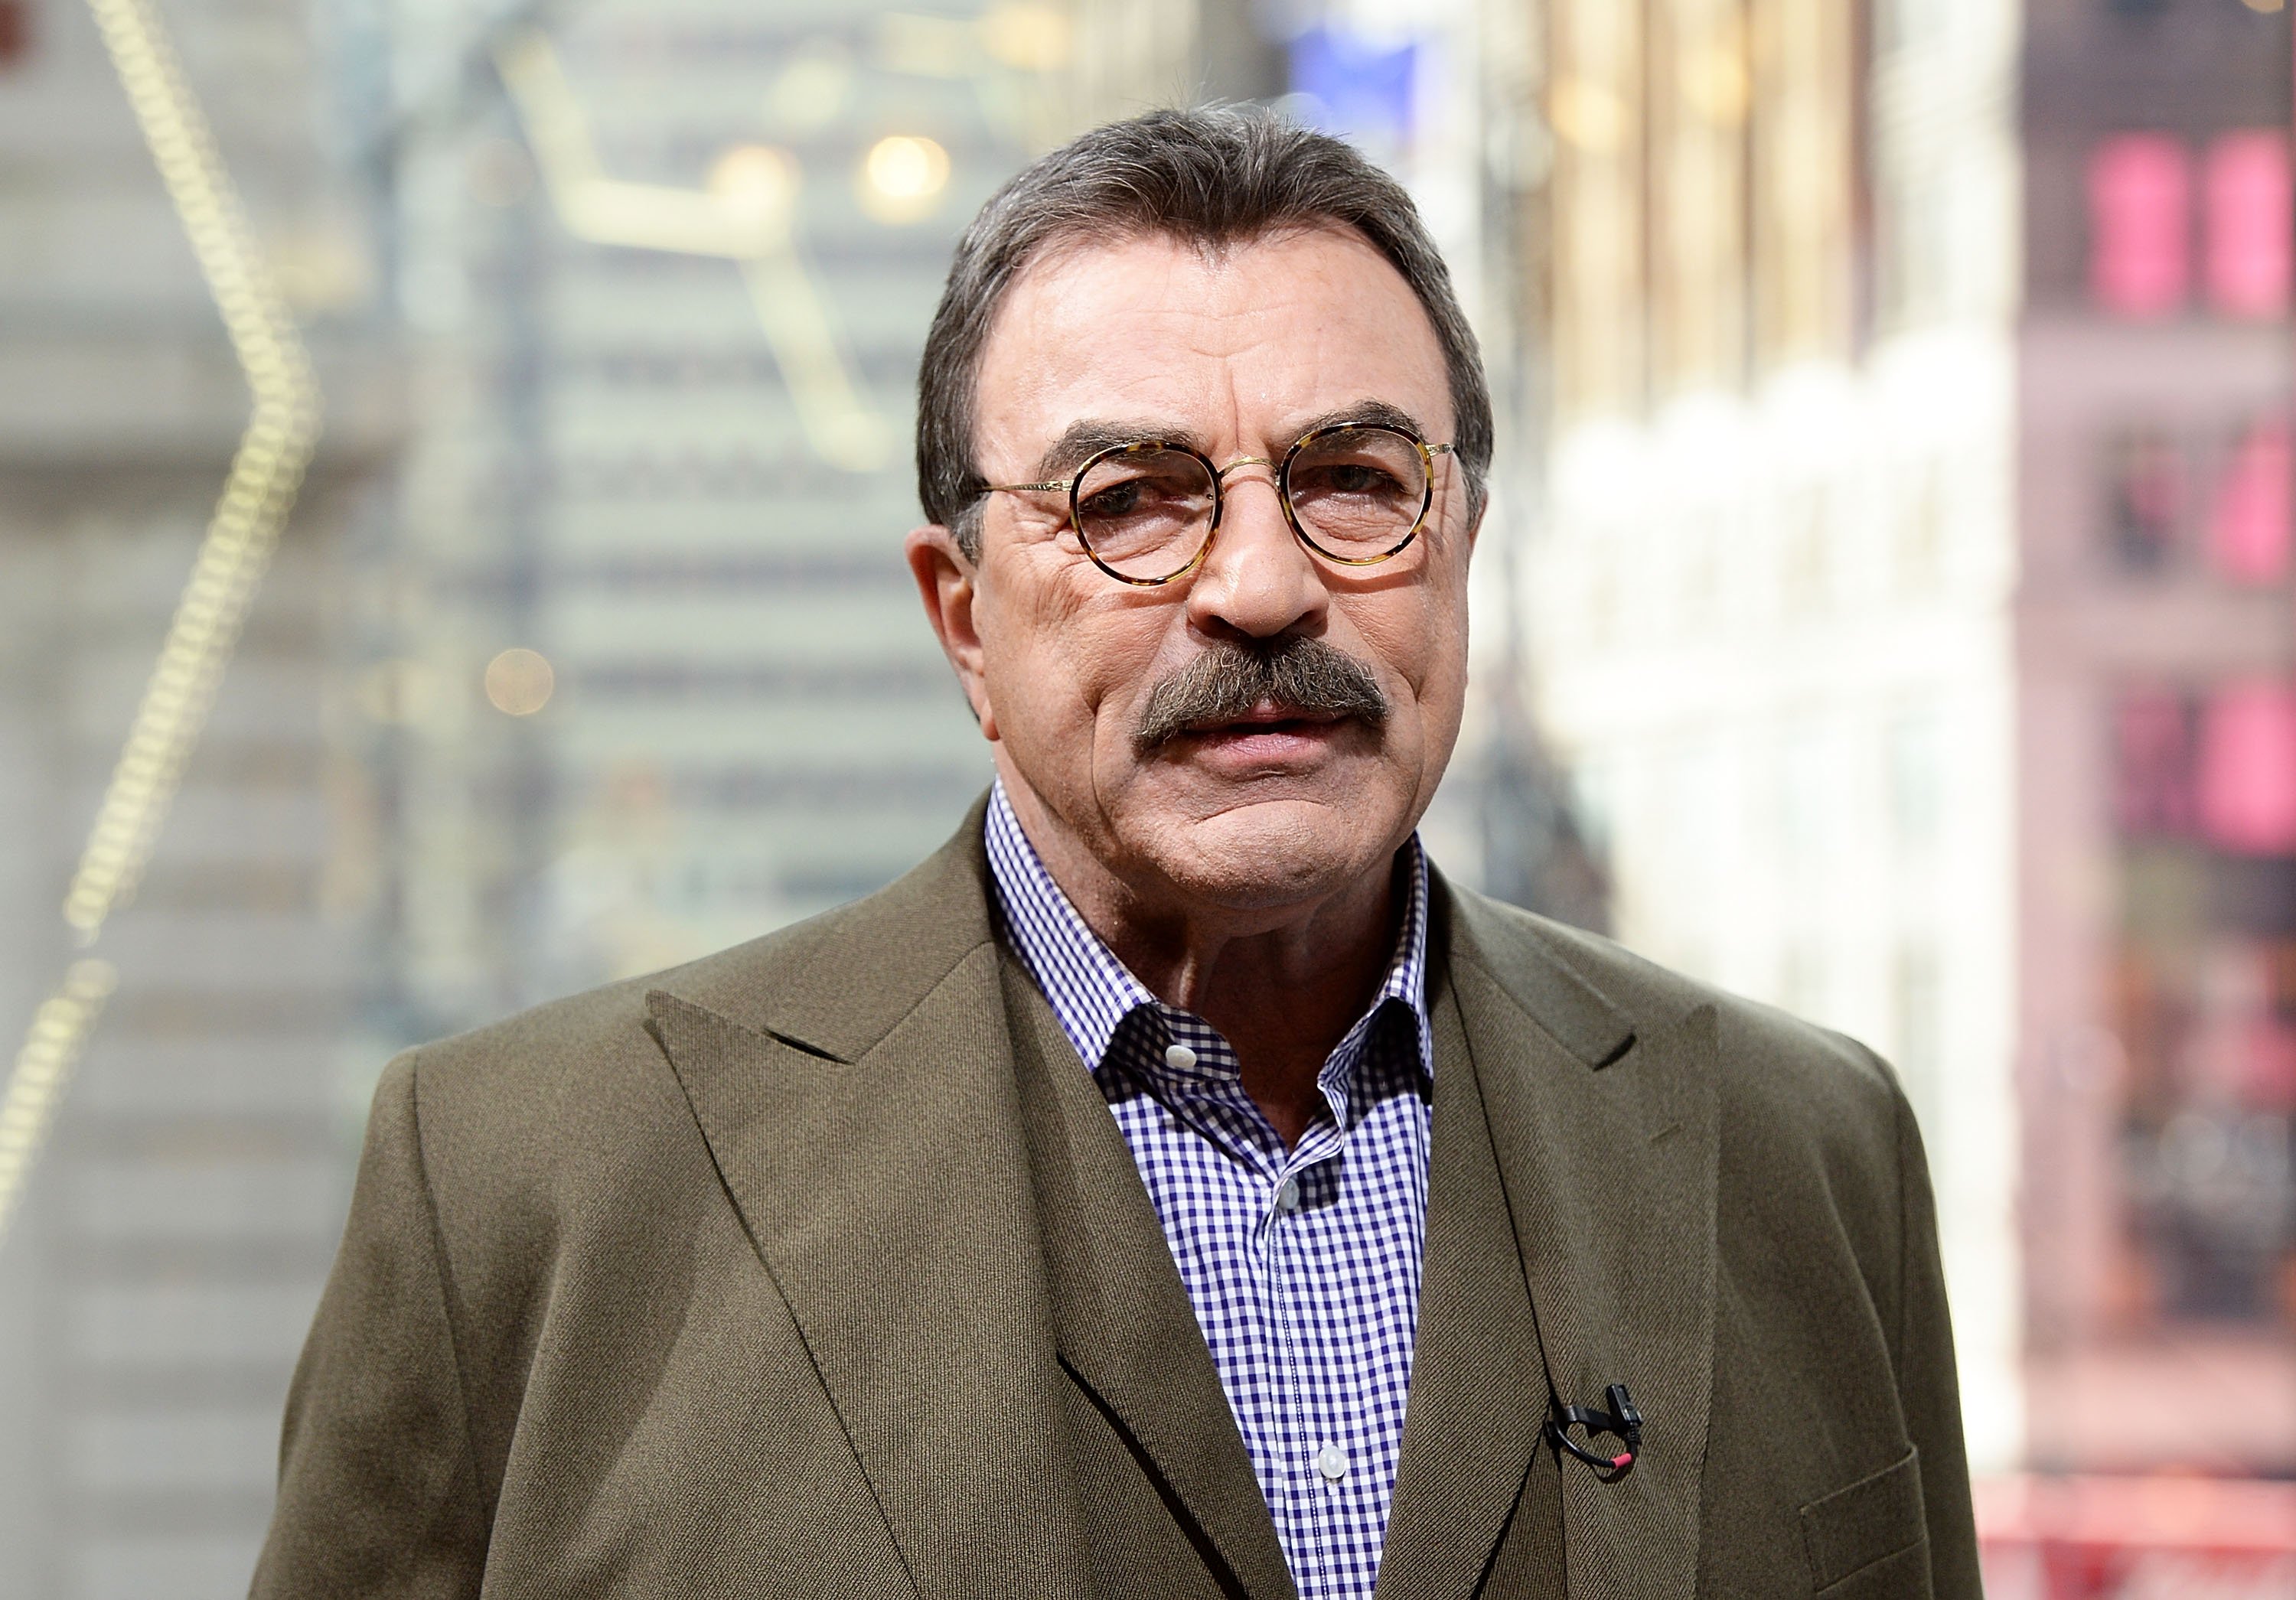 Tom Selleck visits "Extra" at H&M Times Square on October 15, 2015 | Photo: GettyImages